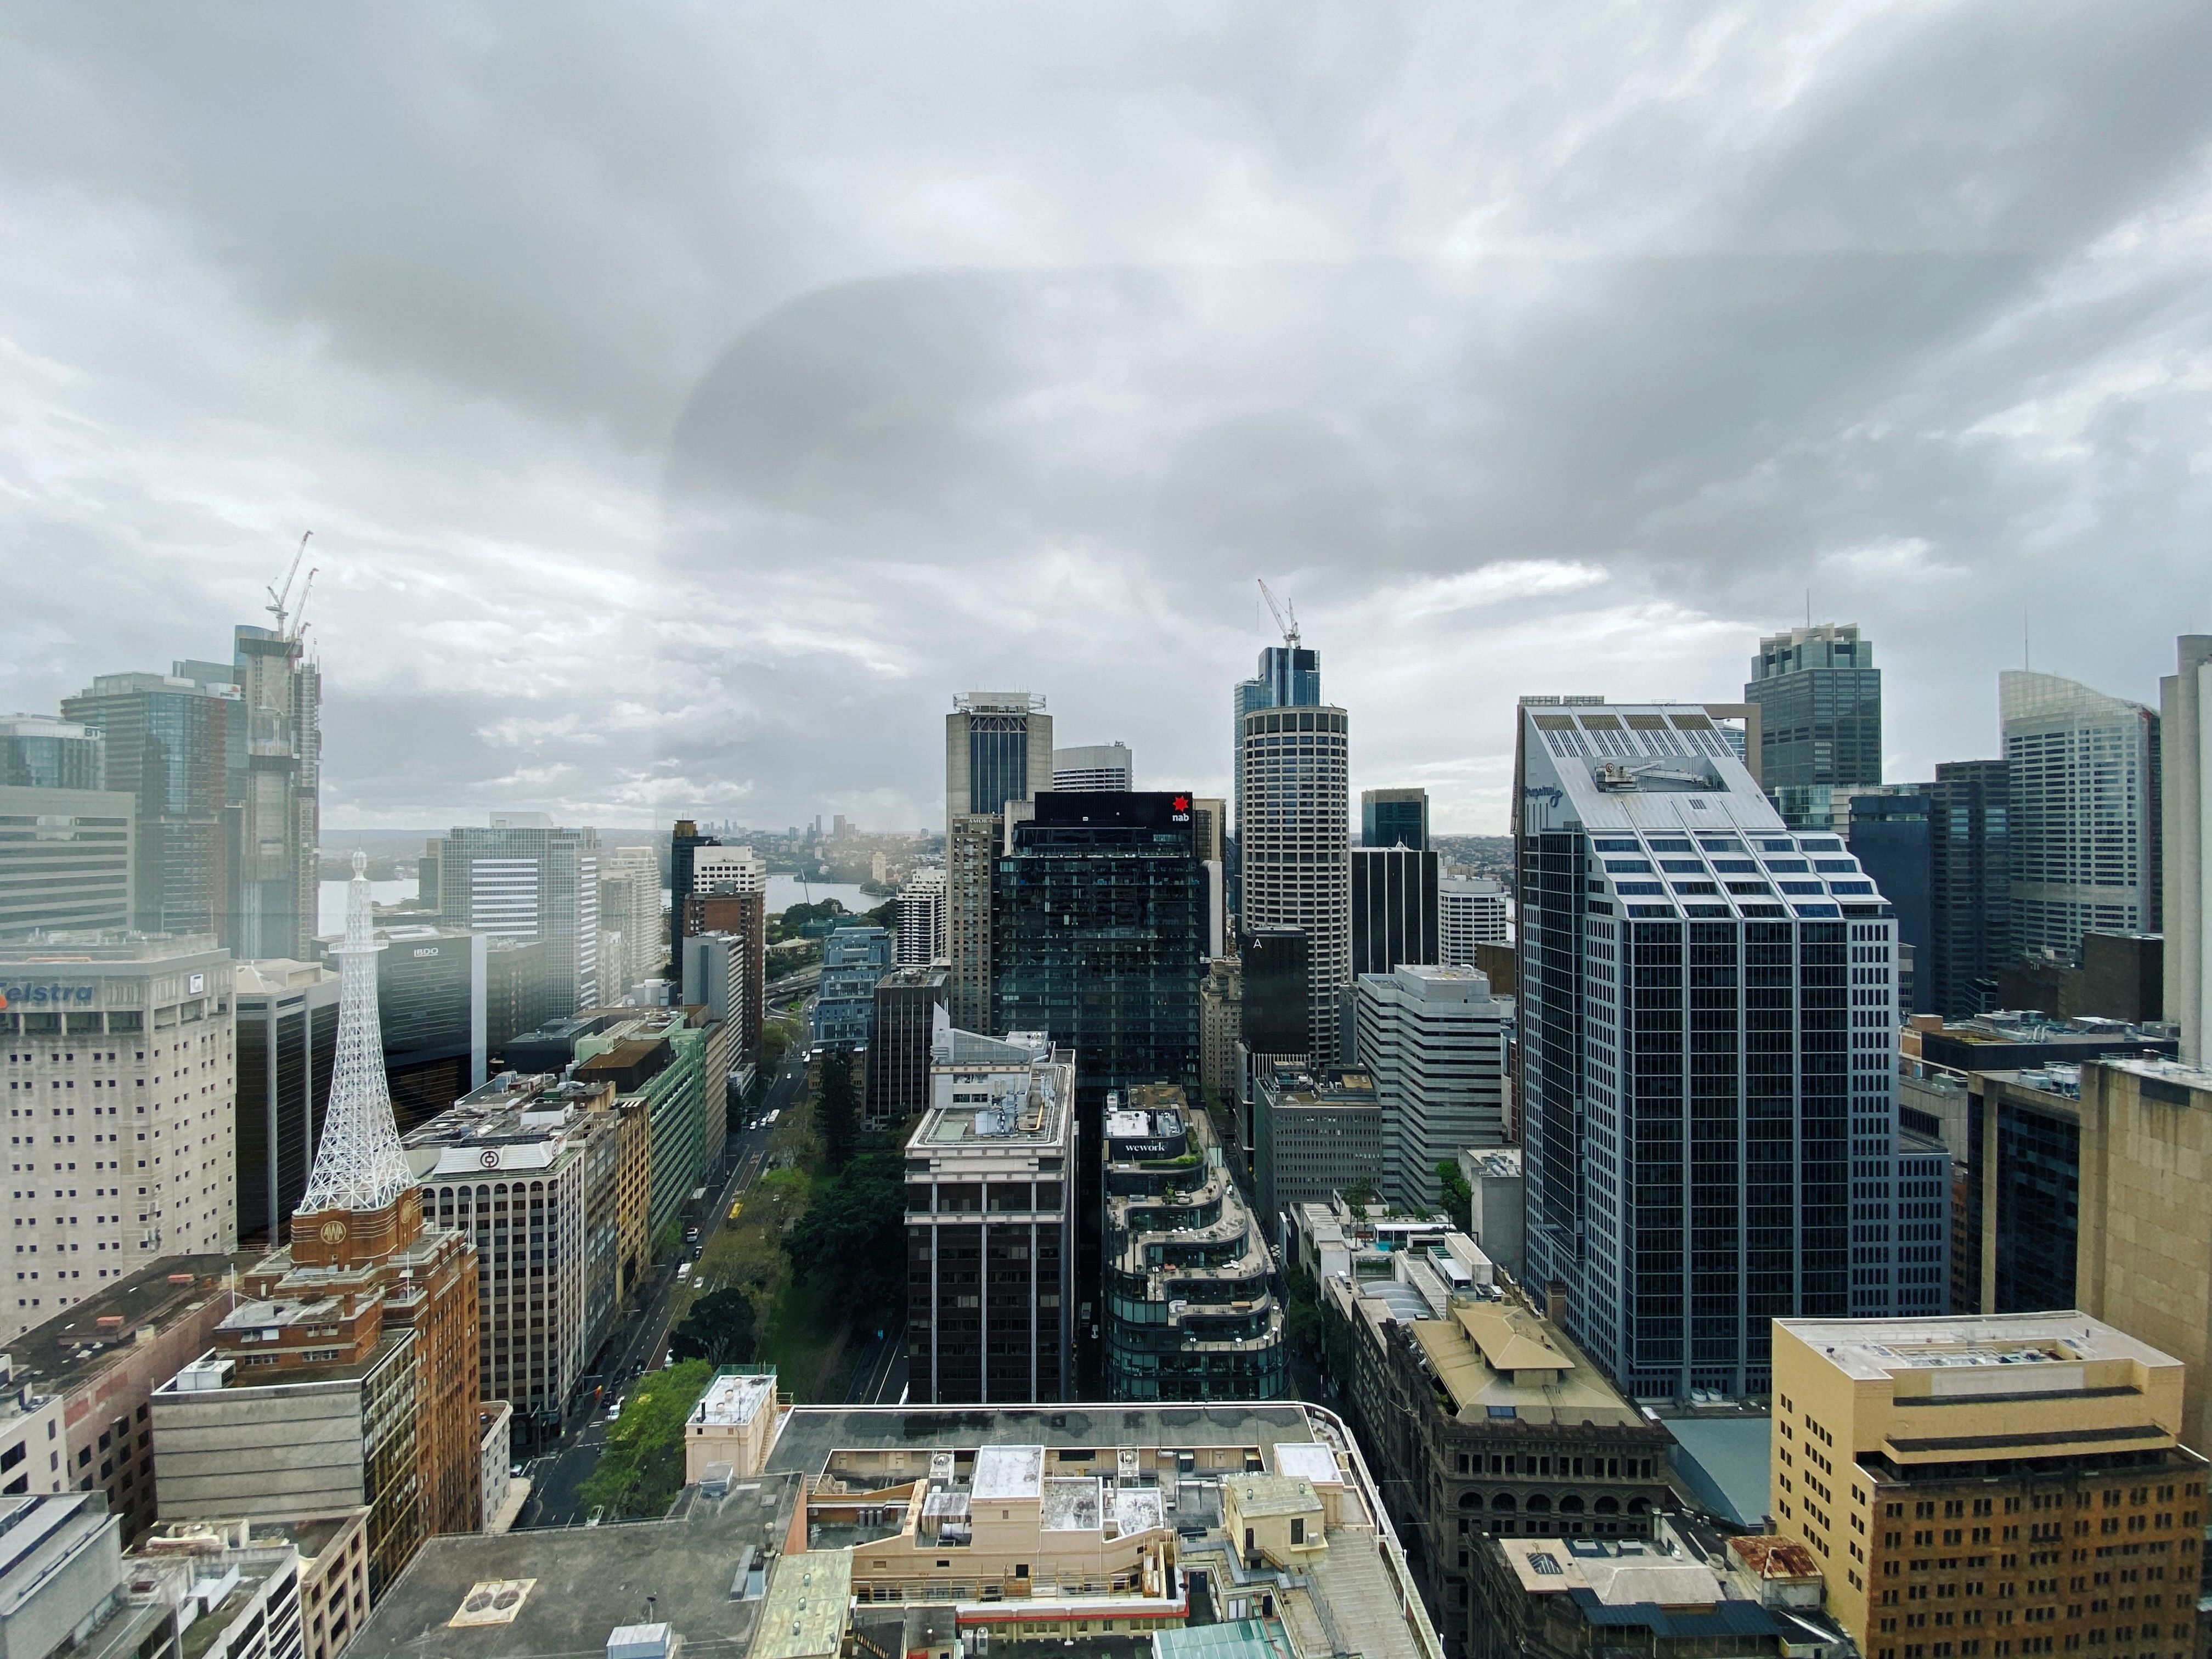 A photo looking out over Sydney CBD from the 30th floor of our office. Lots of tall buildings, and it's all cloudy and miserable-looking.